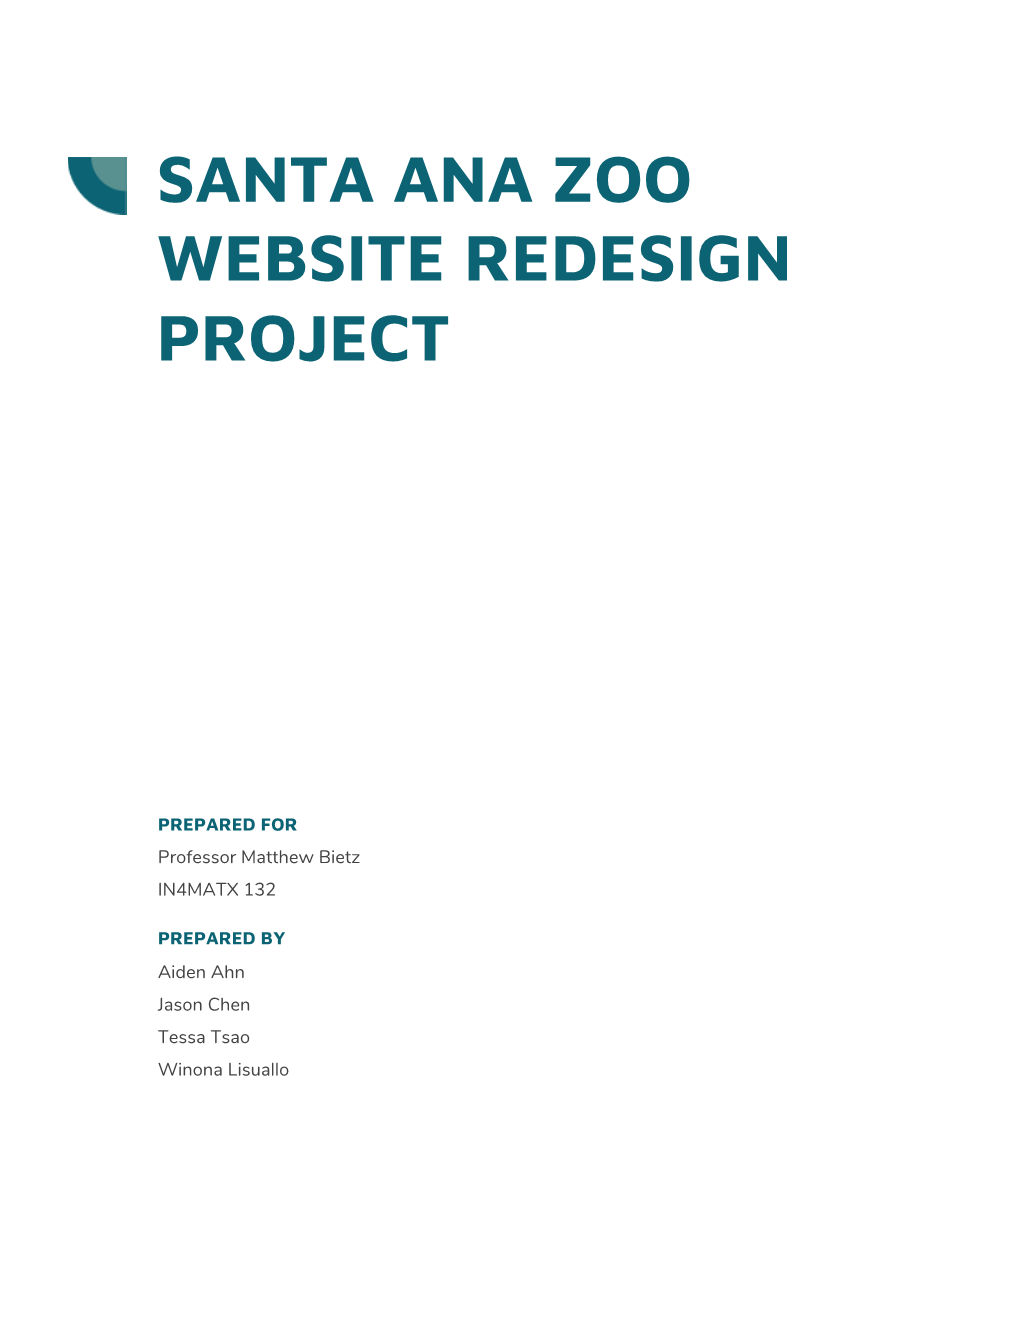 Santa Ana Zoo Website Redesign Project